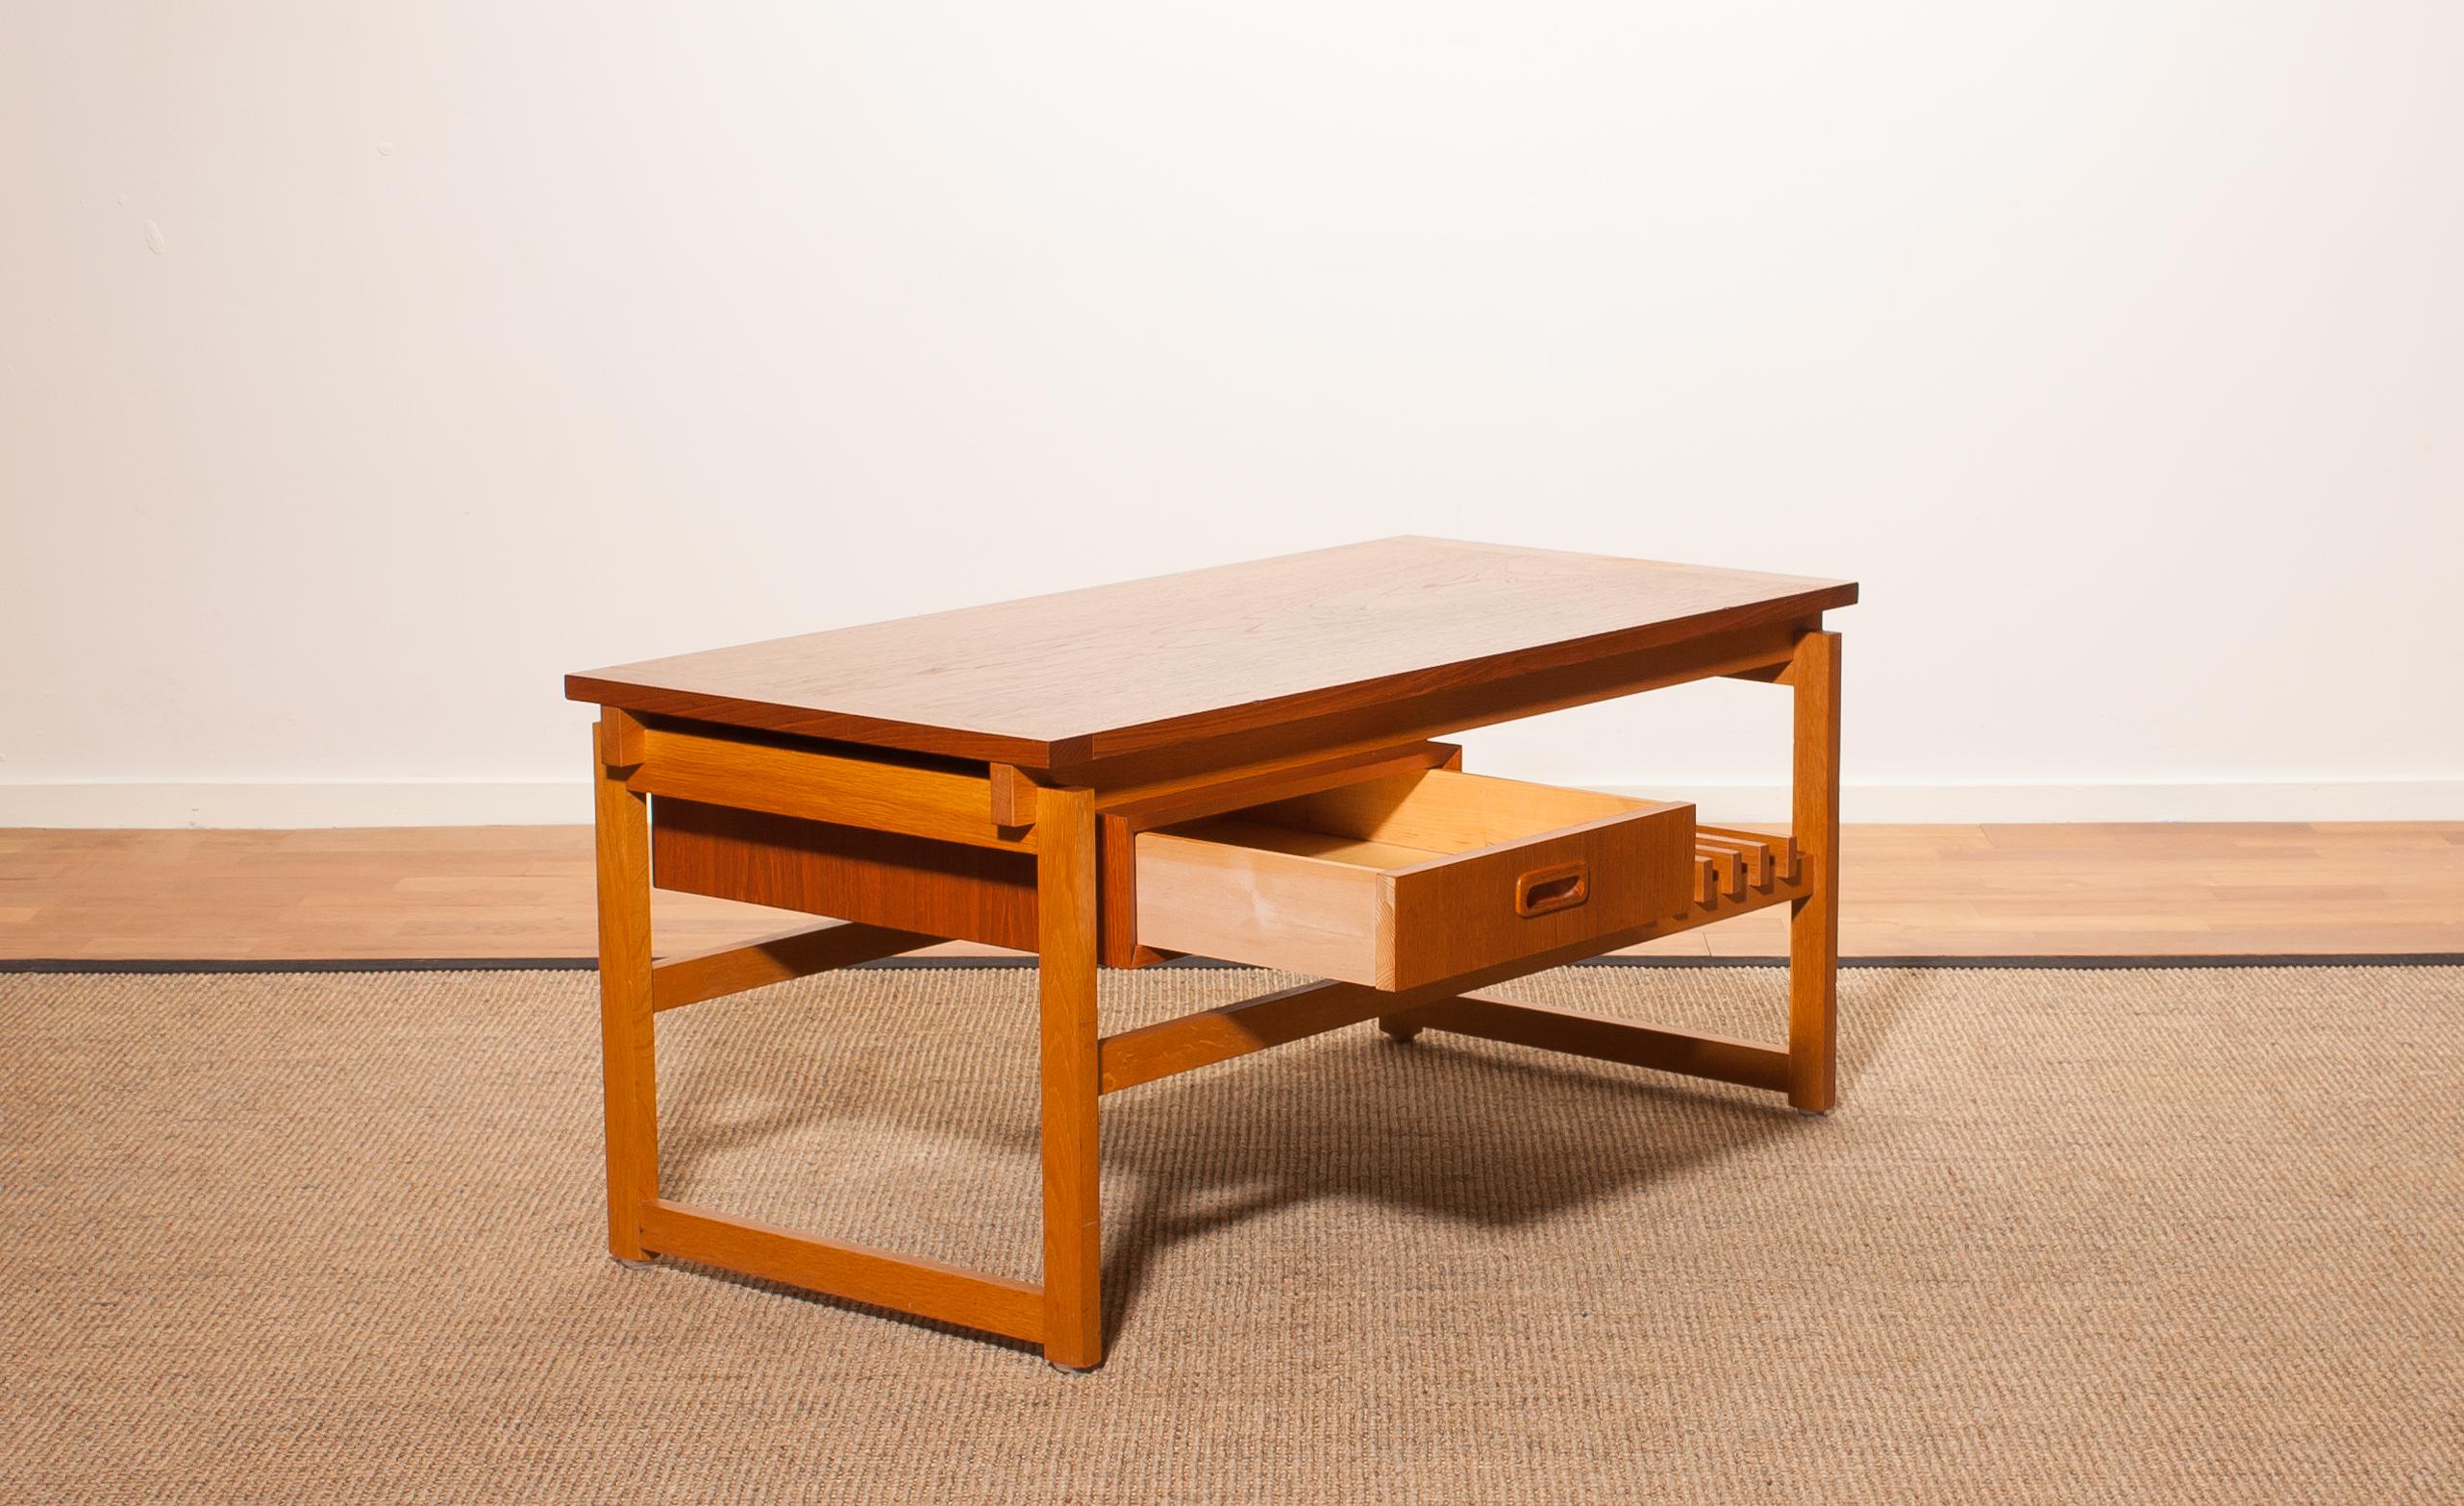 Danish 1970s Teak Coffee / Side Table with Drawer Made In Denmark.